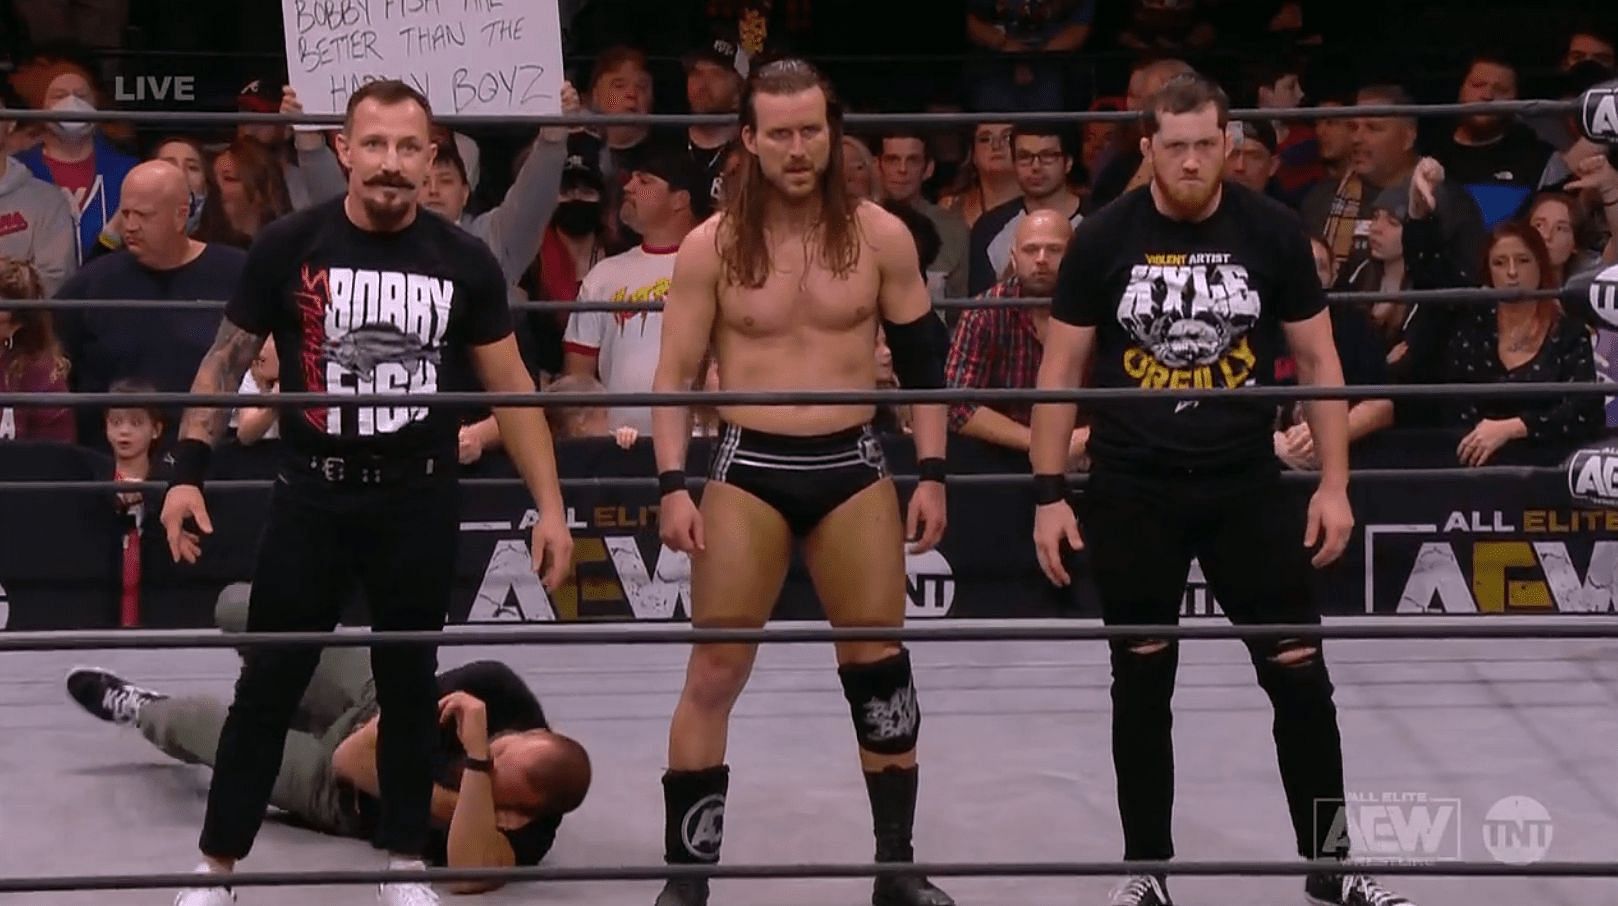 Cole and reDRagon aew quickly becoming a force to be reckoned with.